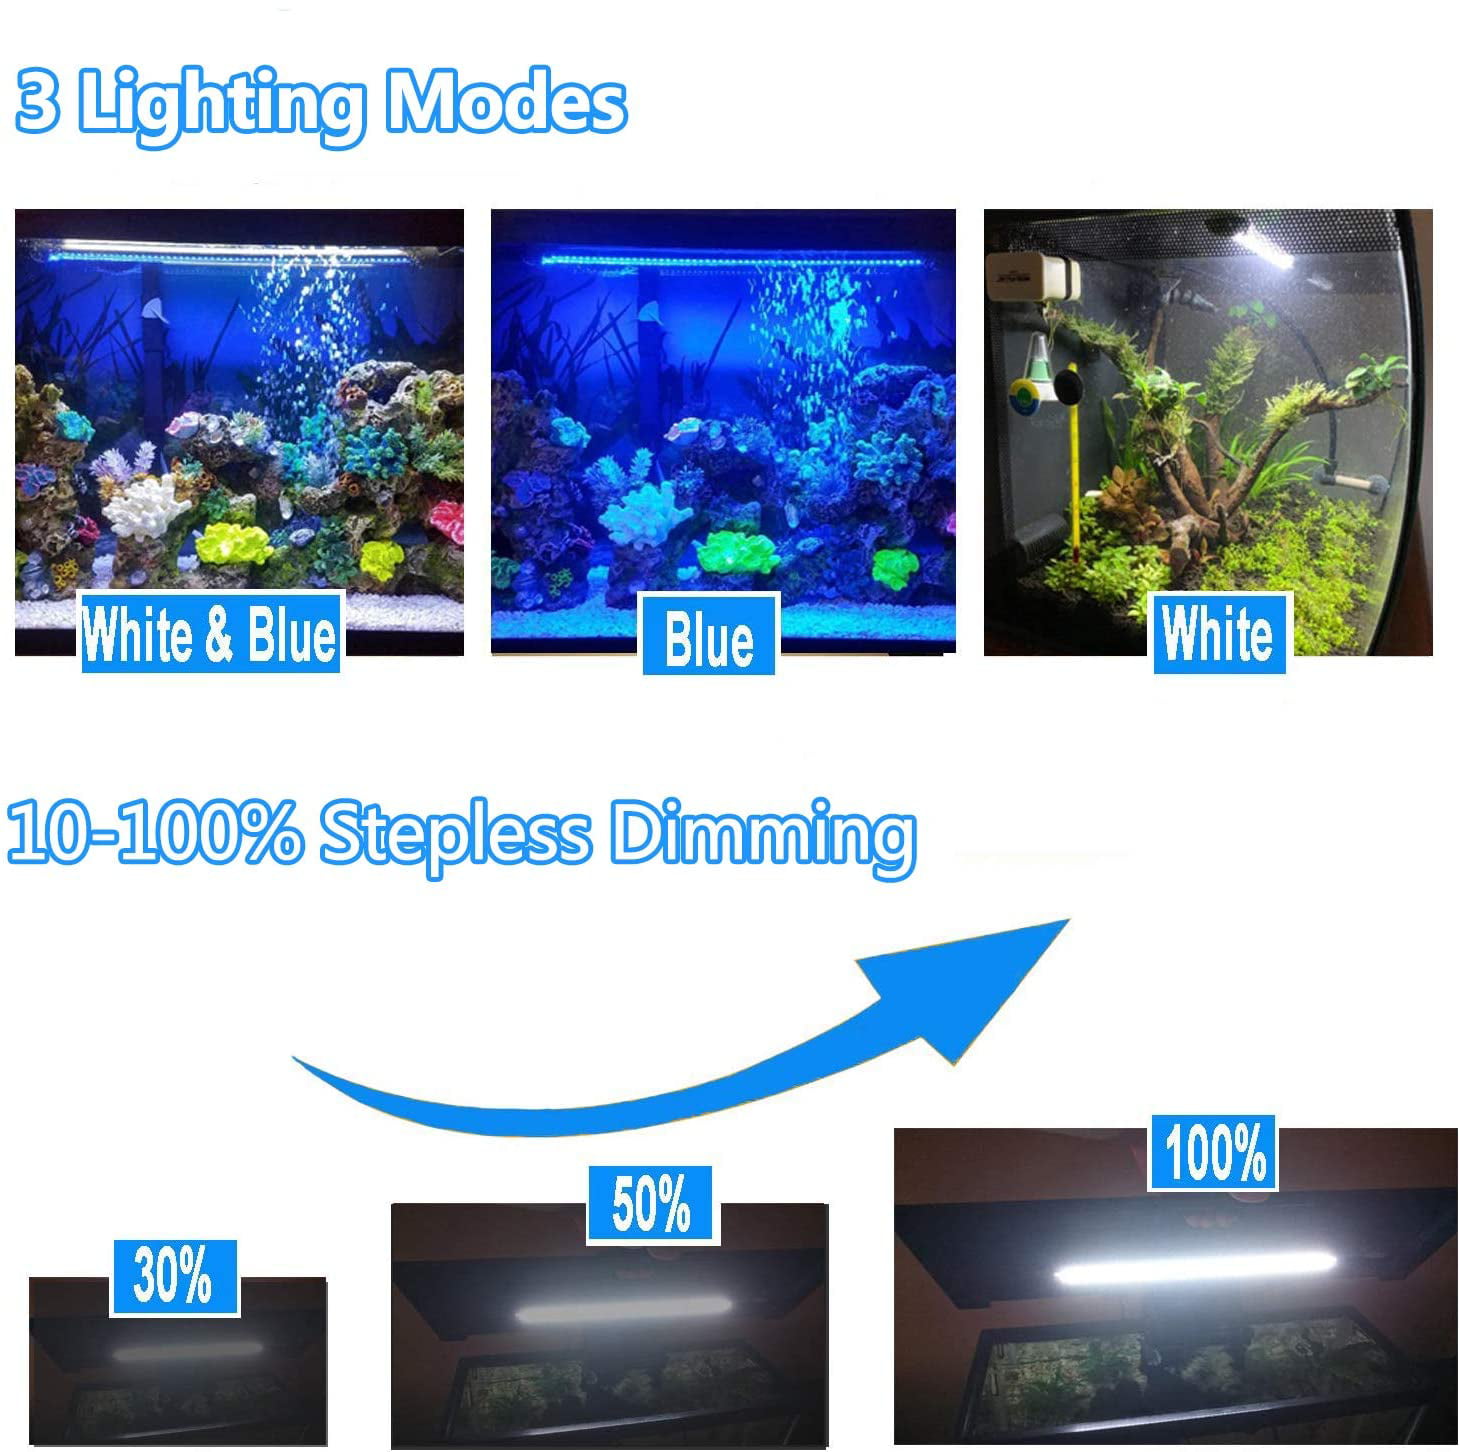 Fish Tank Light with Timer Auto On/Off and Dimming Function,3 Light Modes Dimmable White&Blue&White-Blue,10 Brightness Levels Optional &3 Levels of timed Loop Function Submersible LED Aquarium Light 